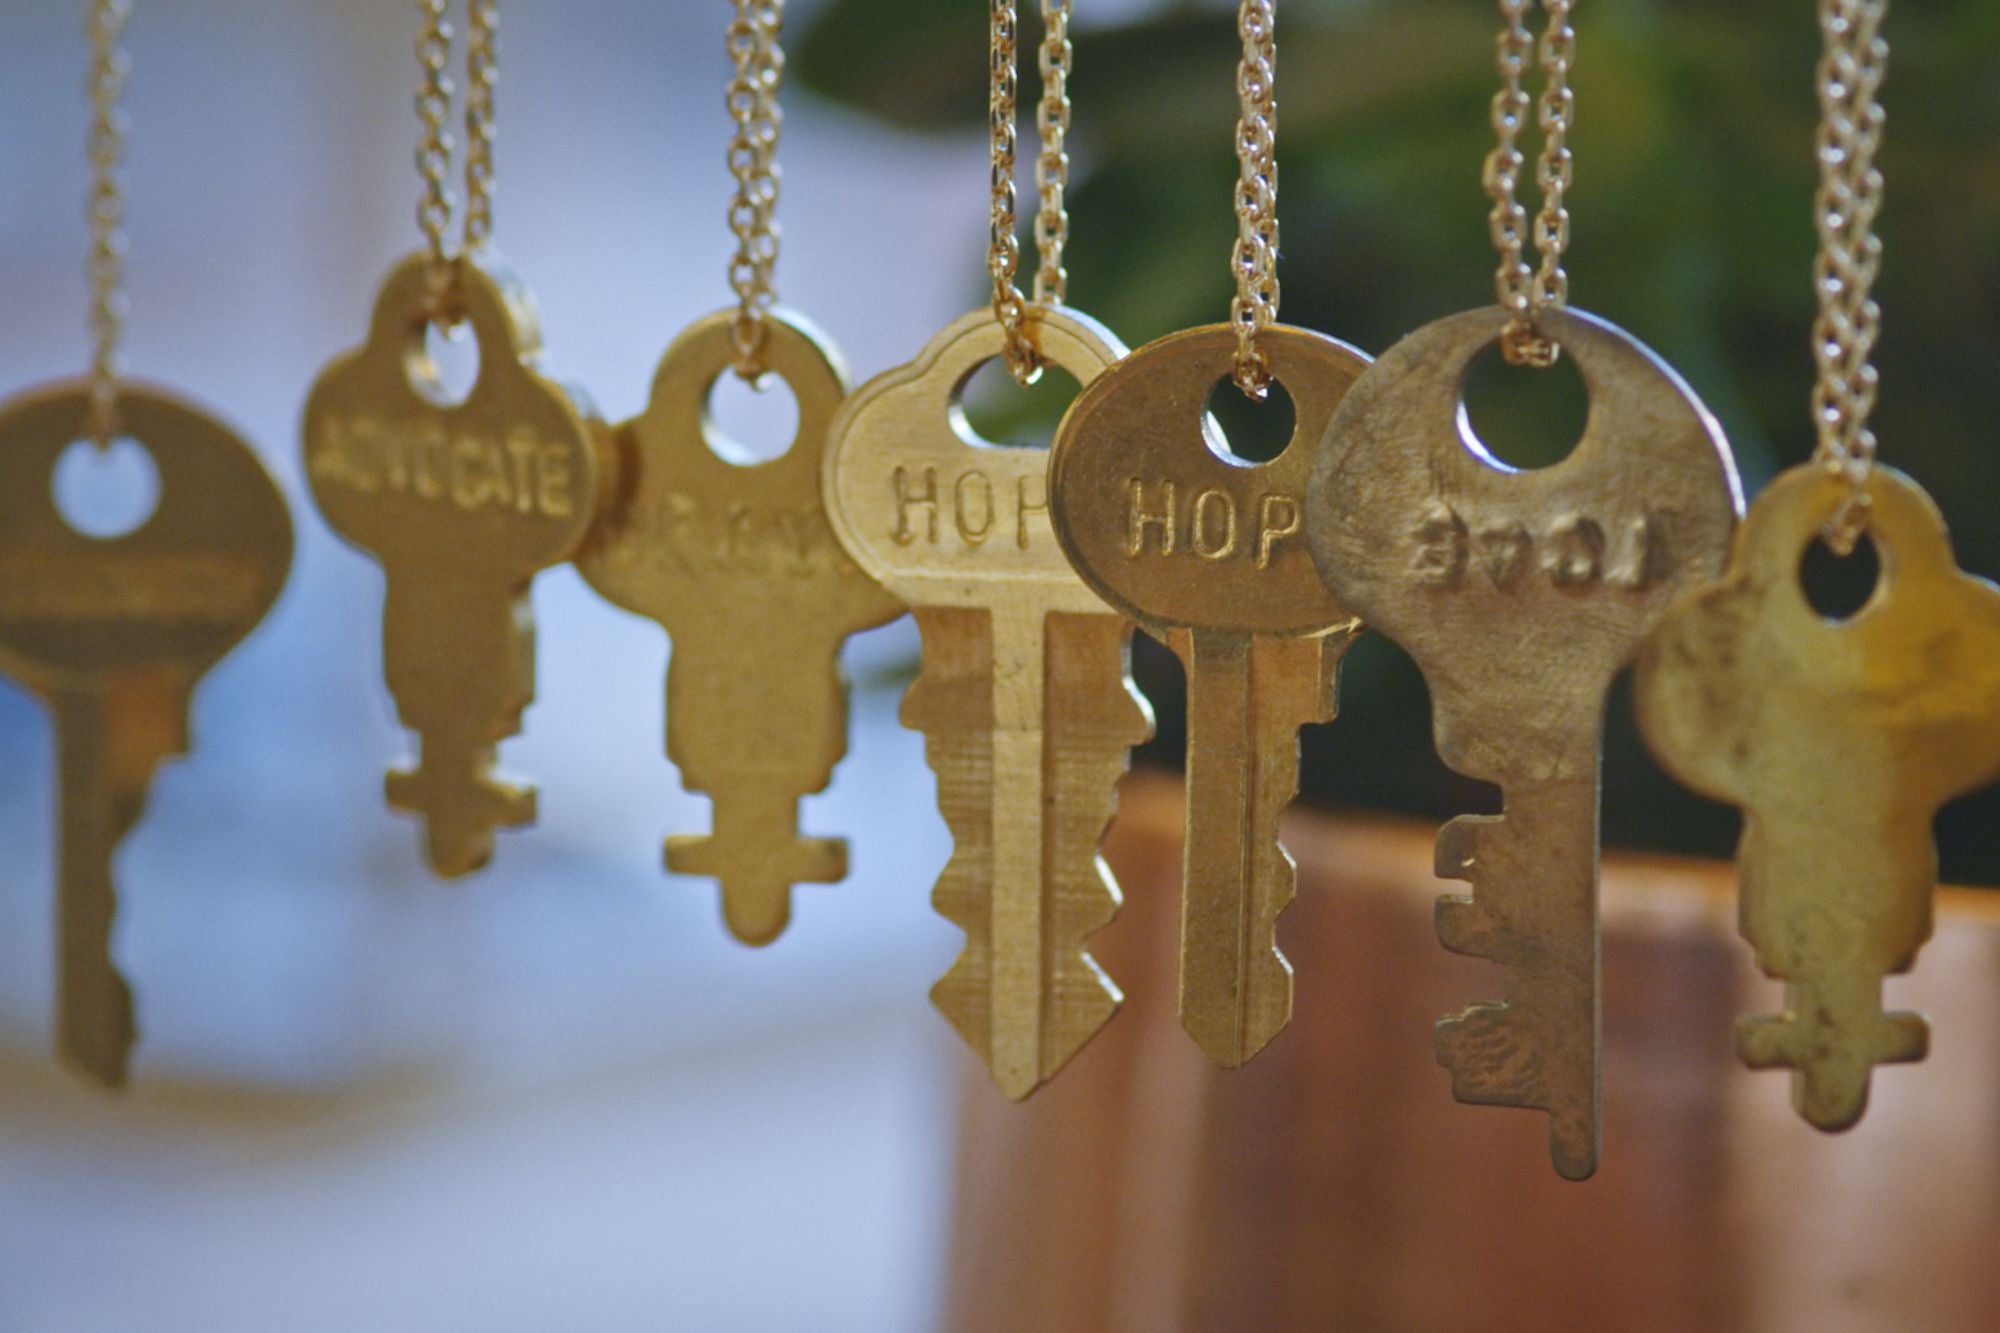 This Jewelry Company Is Using the Power of Words to Change Lives